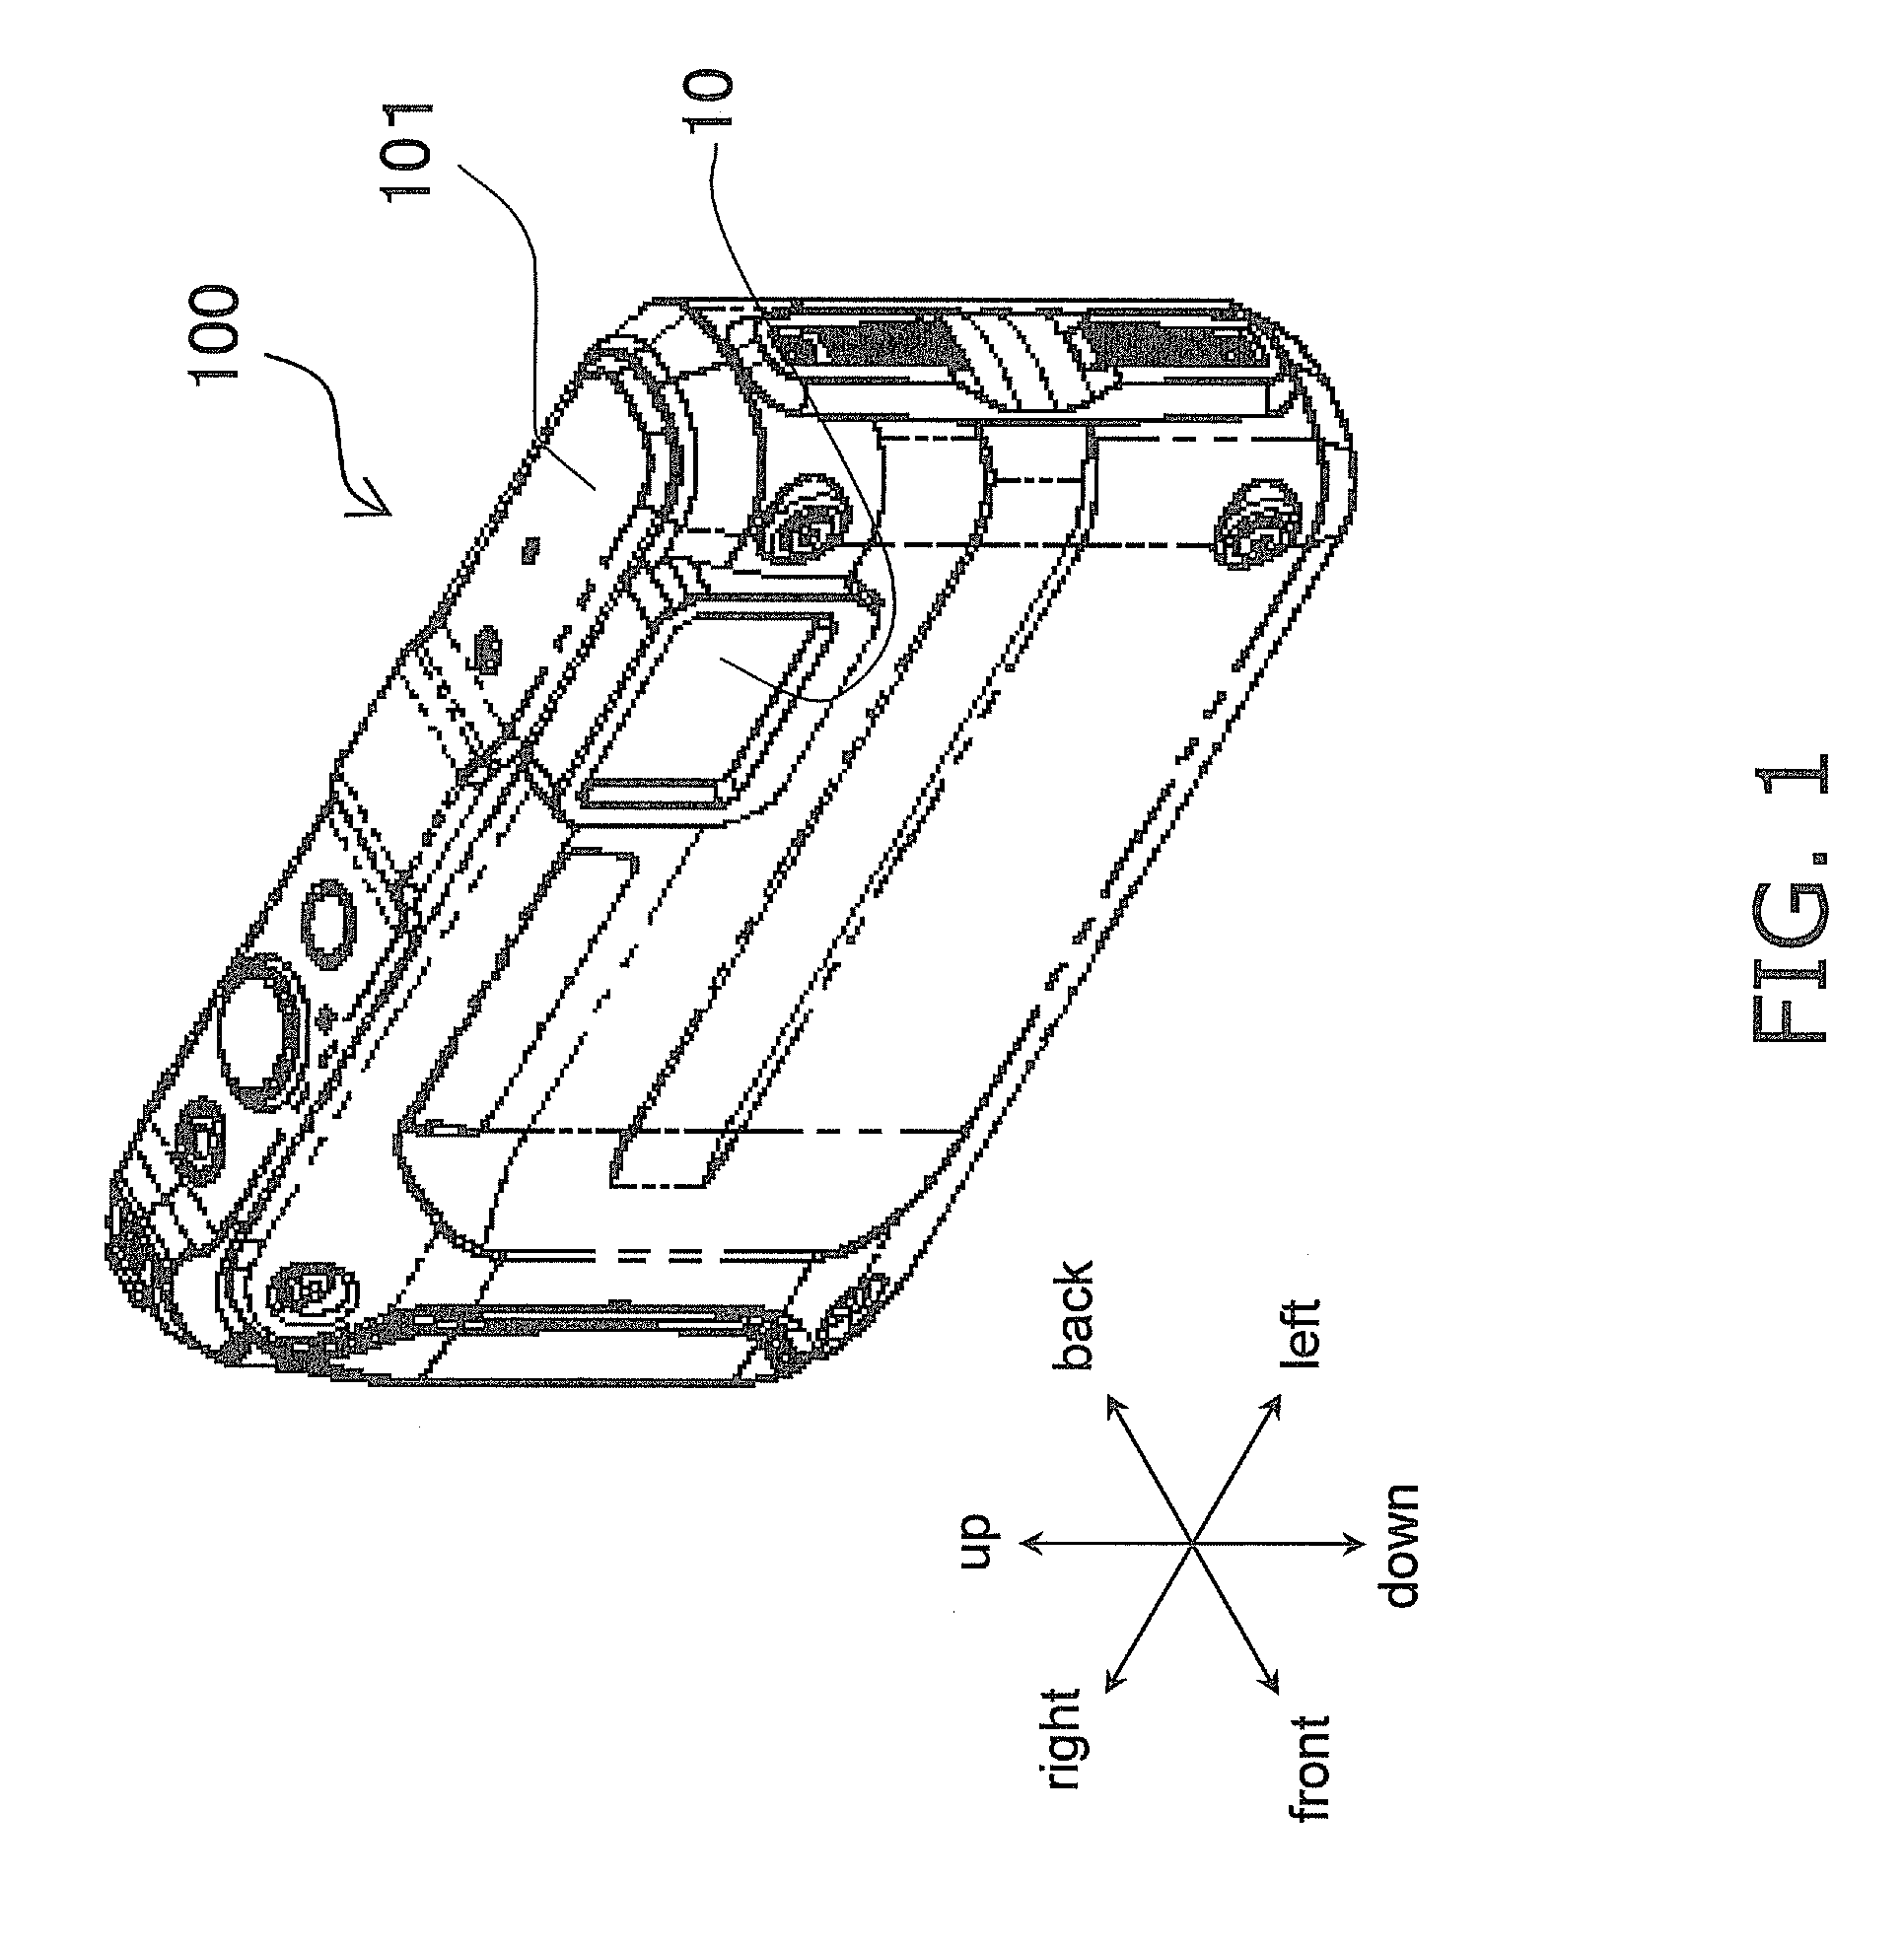 Waterproof structure for electronic device